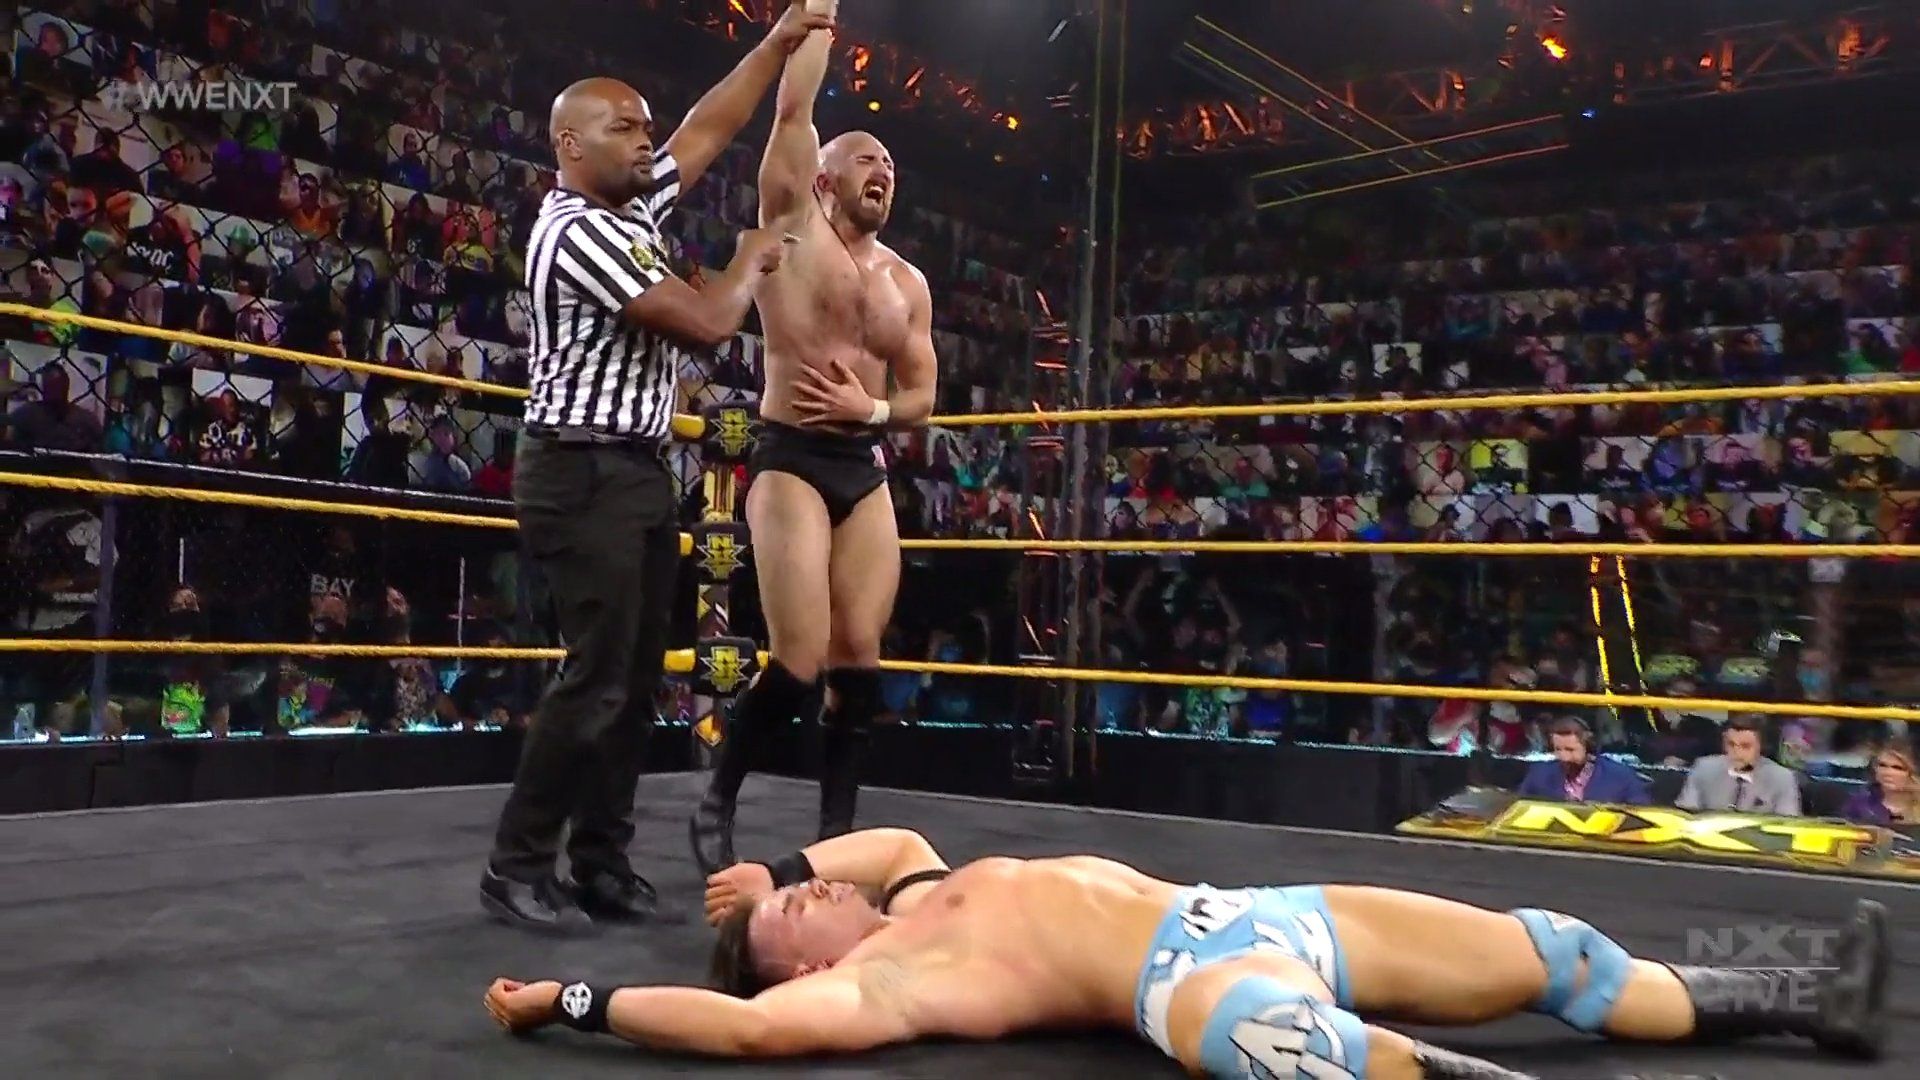 NXT Superstars Oney Lorcan and Austin Theory after their match on NXT 6/8/2021